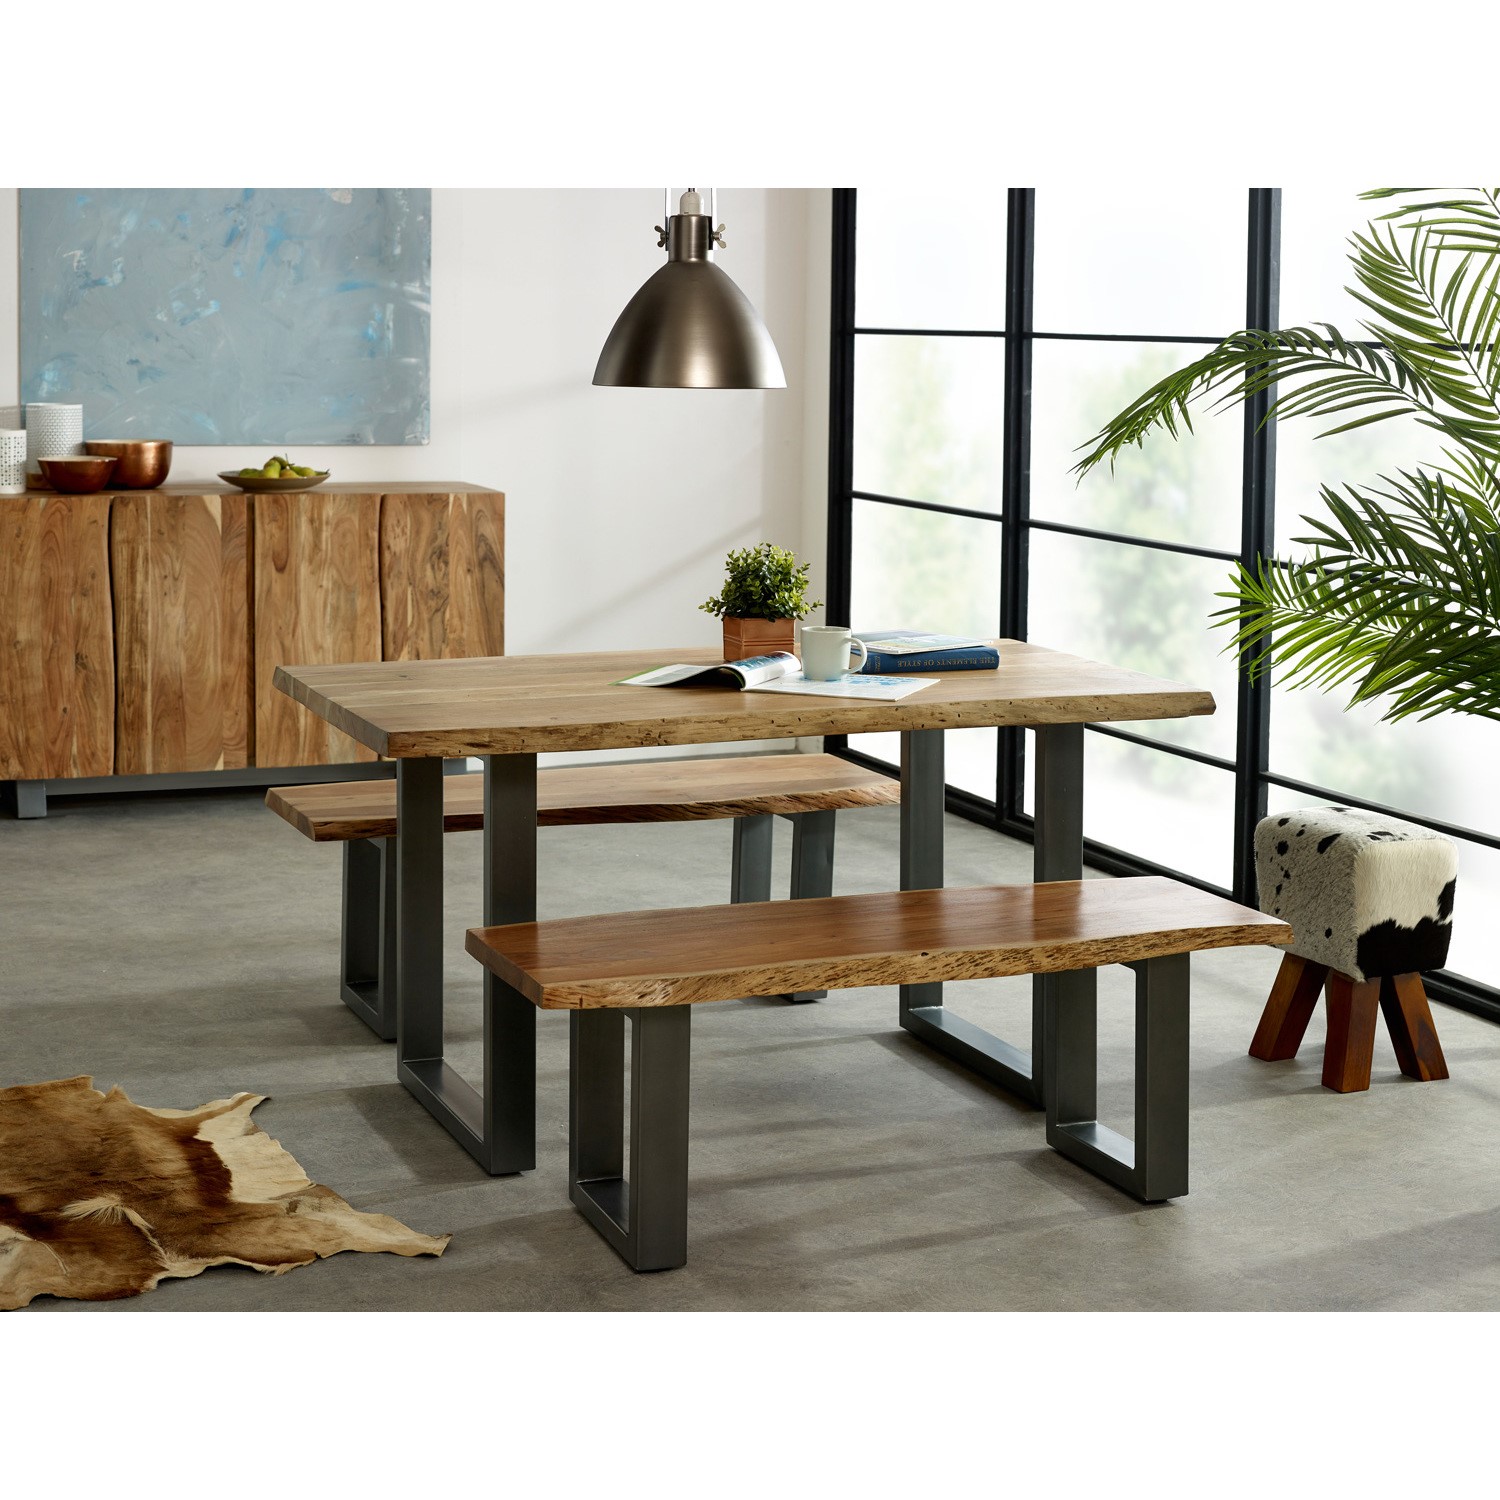 Read more about Large live edge solid wood dining bench